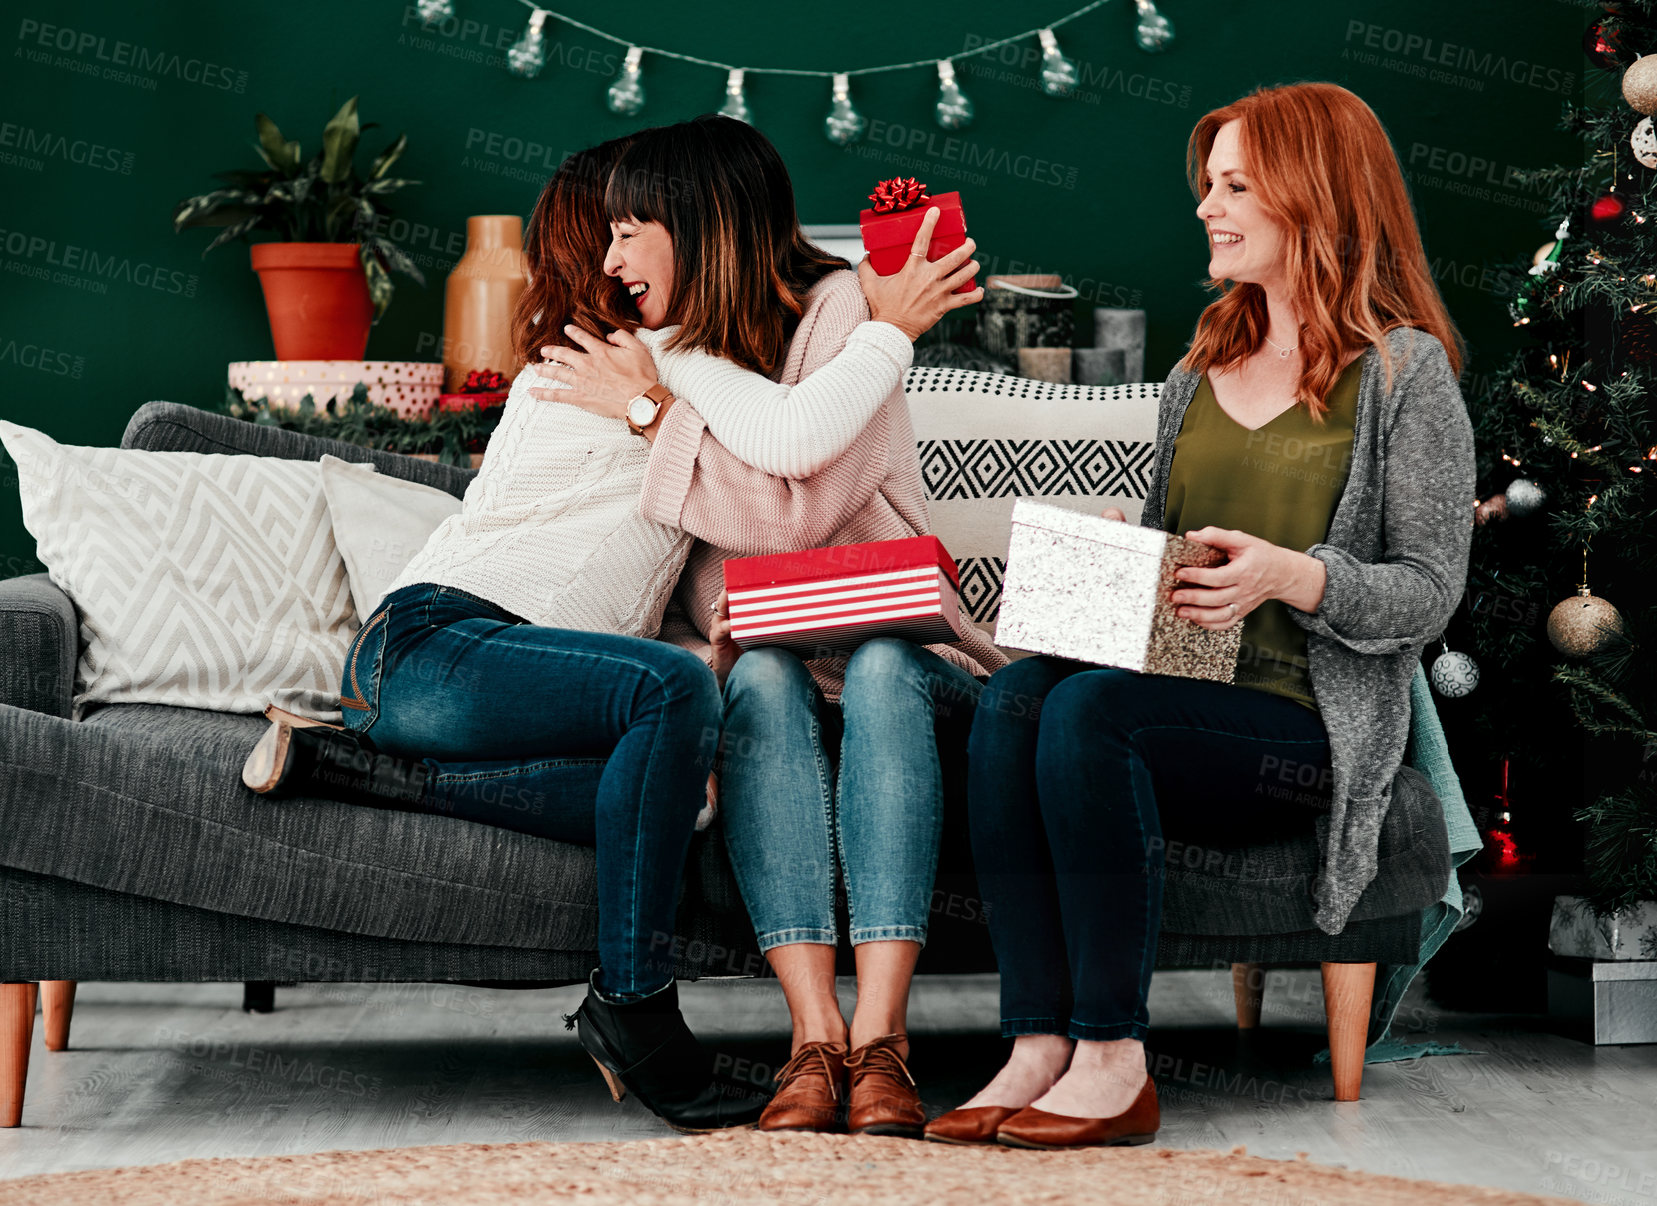 Buy stock photo Shot of three attractive middle aged women opening presents together while being seated on a sofa during Christmas time